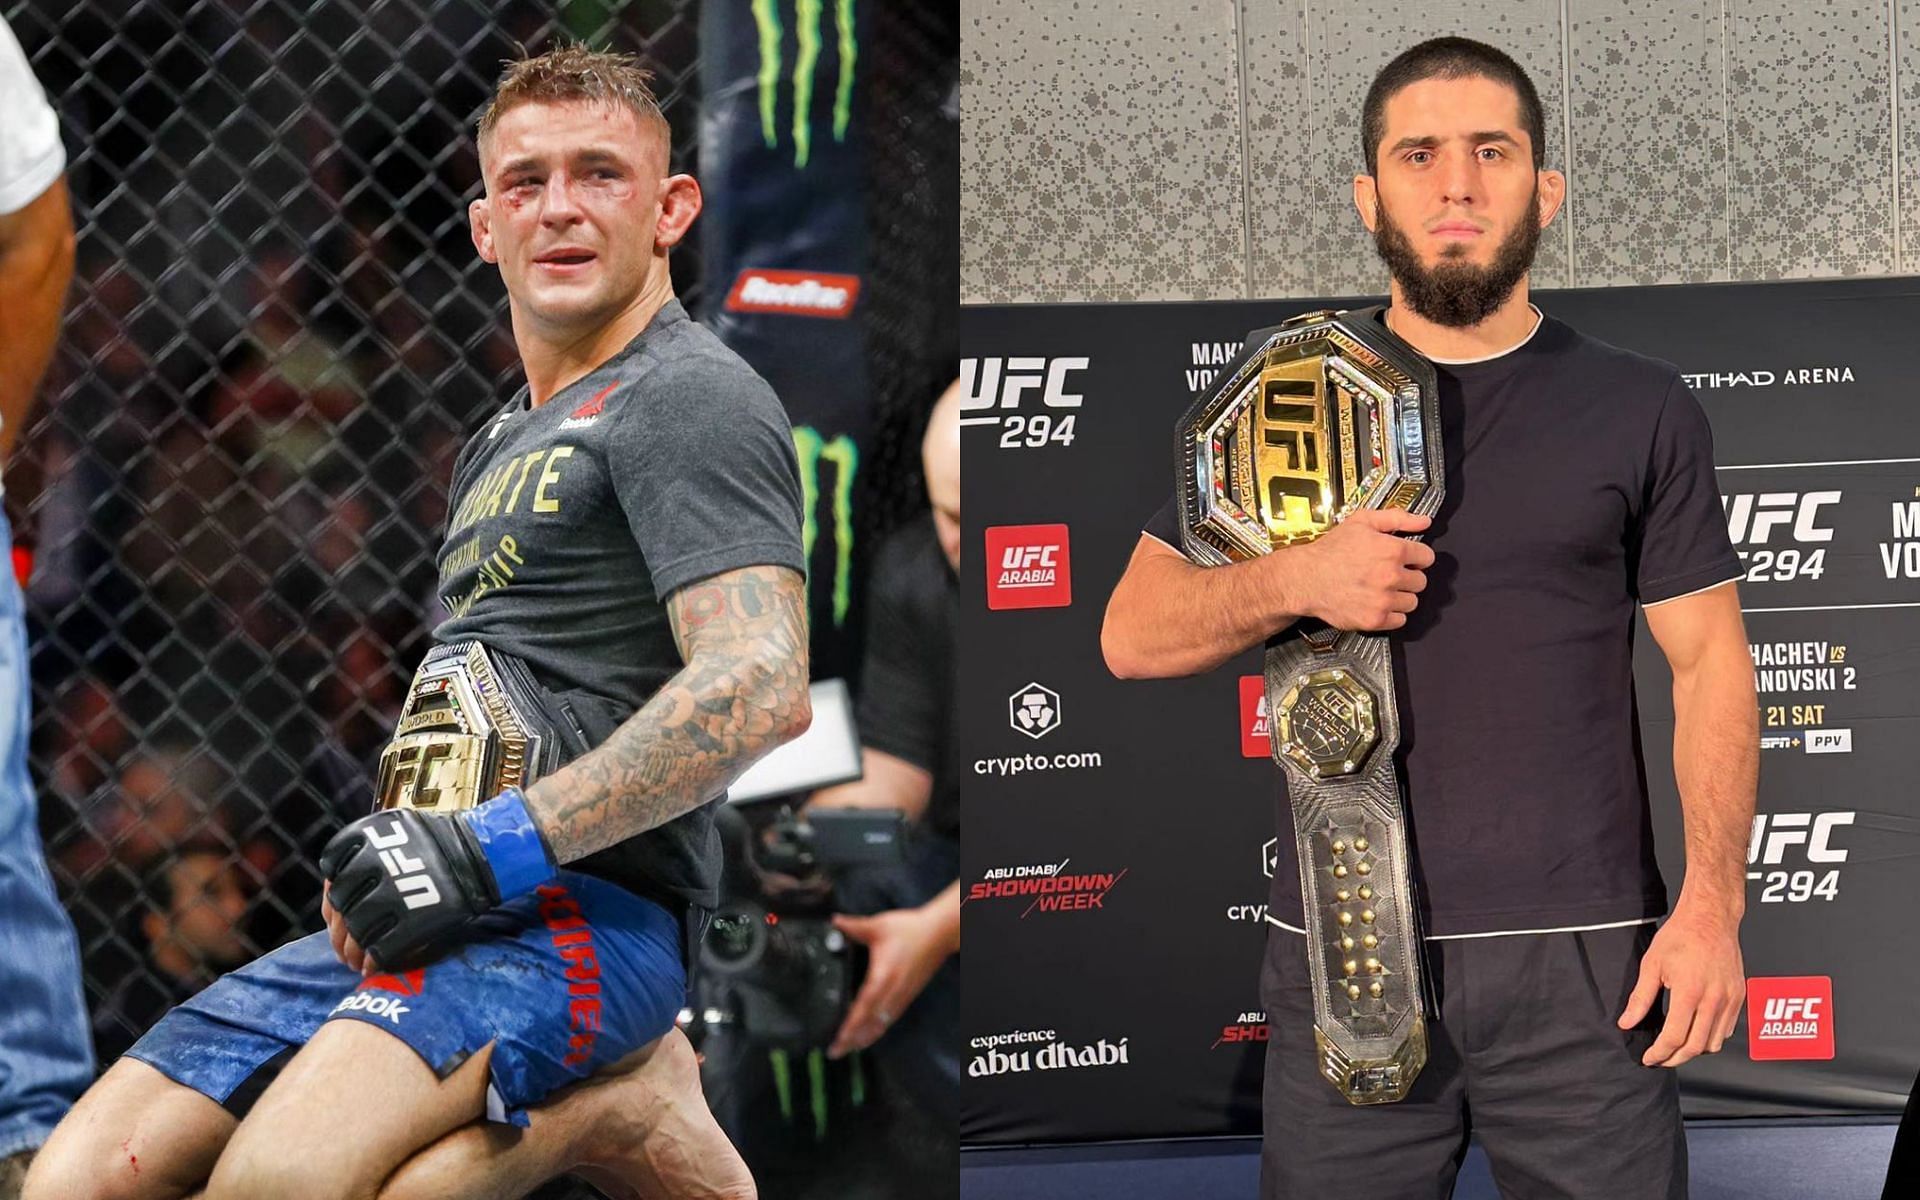 Former interim champion Dustin Poirier (left) believes his career will be complete with a win over lightweight champion Islam Makhachev (right) [Photo Courtesy @dustinpoirier and @islam_makhachev on Instagram]